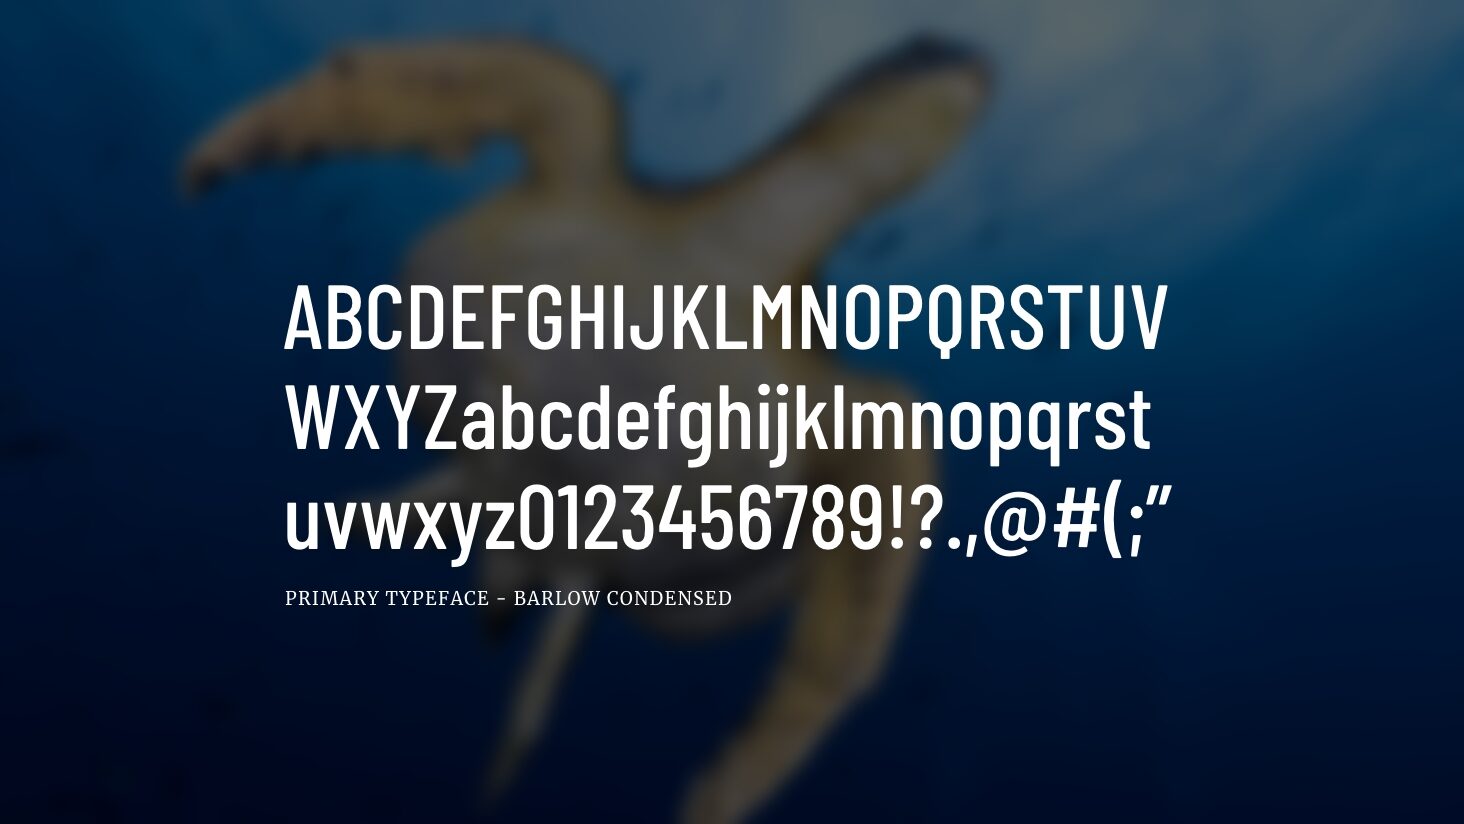 Image for The image is displaying the characters of the Barlow Condensed primary typeface from the Galapagos Conservation Trust website